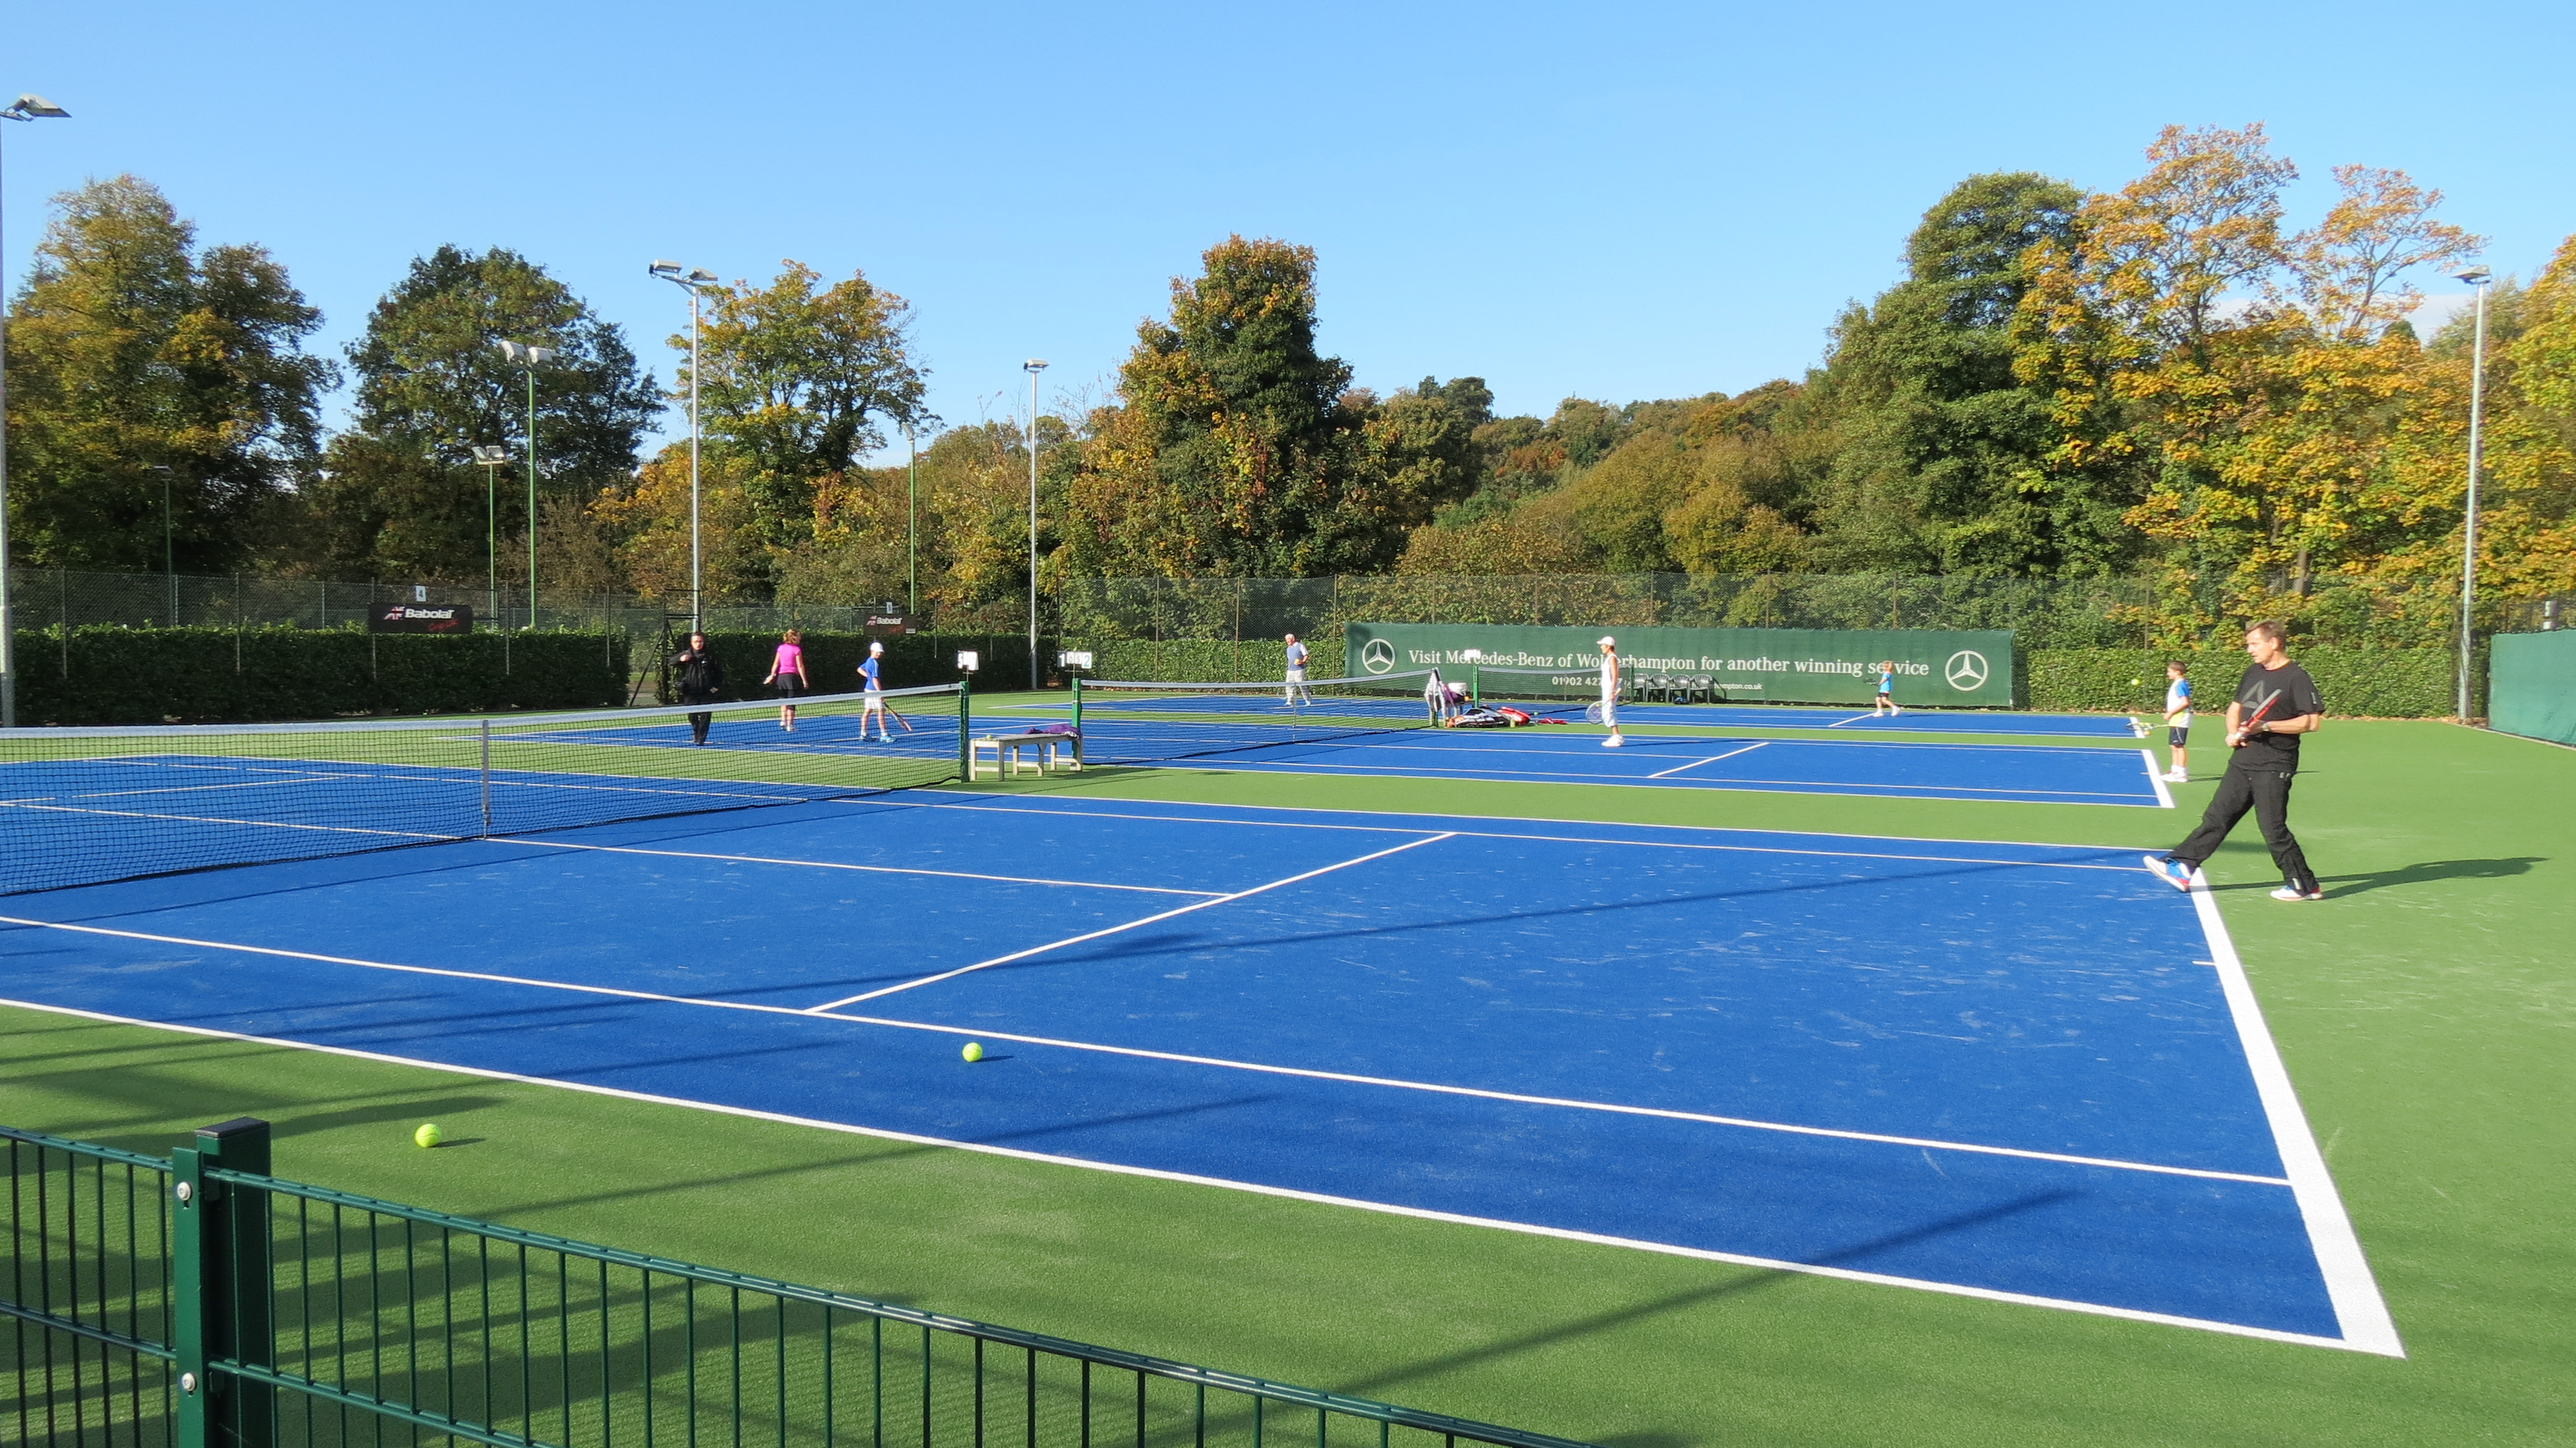 Advantage Pro is the most advanced and durable tennis surface TigerTurf has made to date